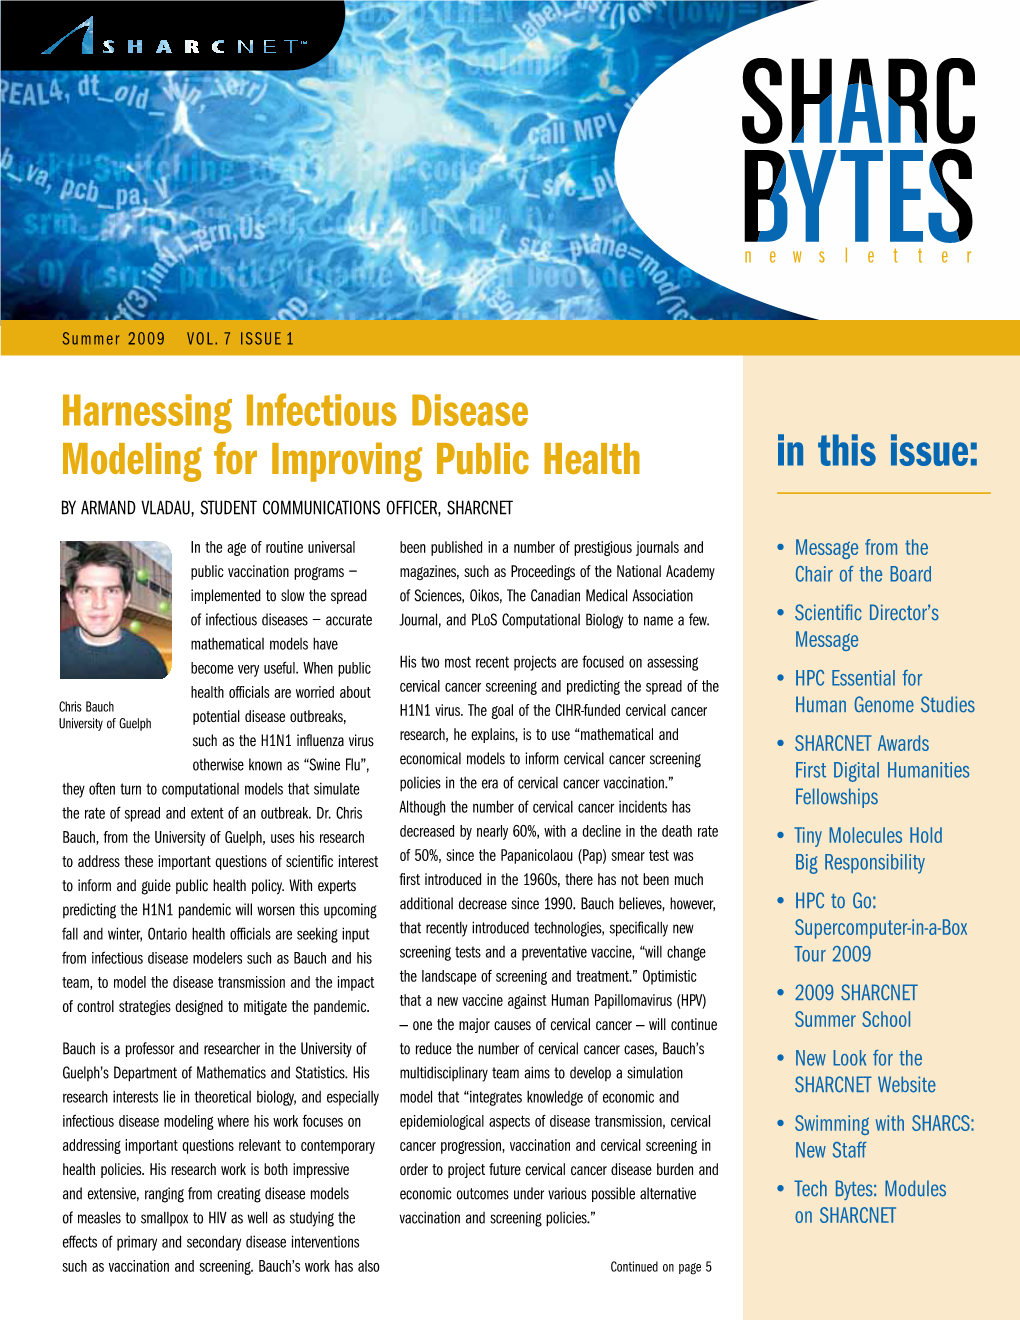 In This Issue: Harnessing Infectious Disease Modeling For